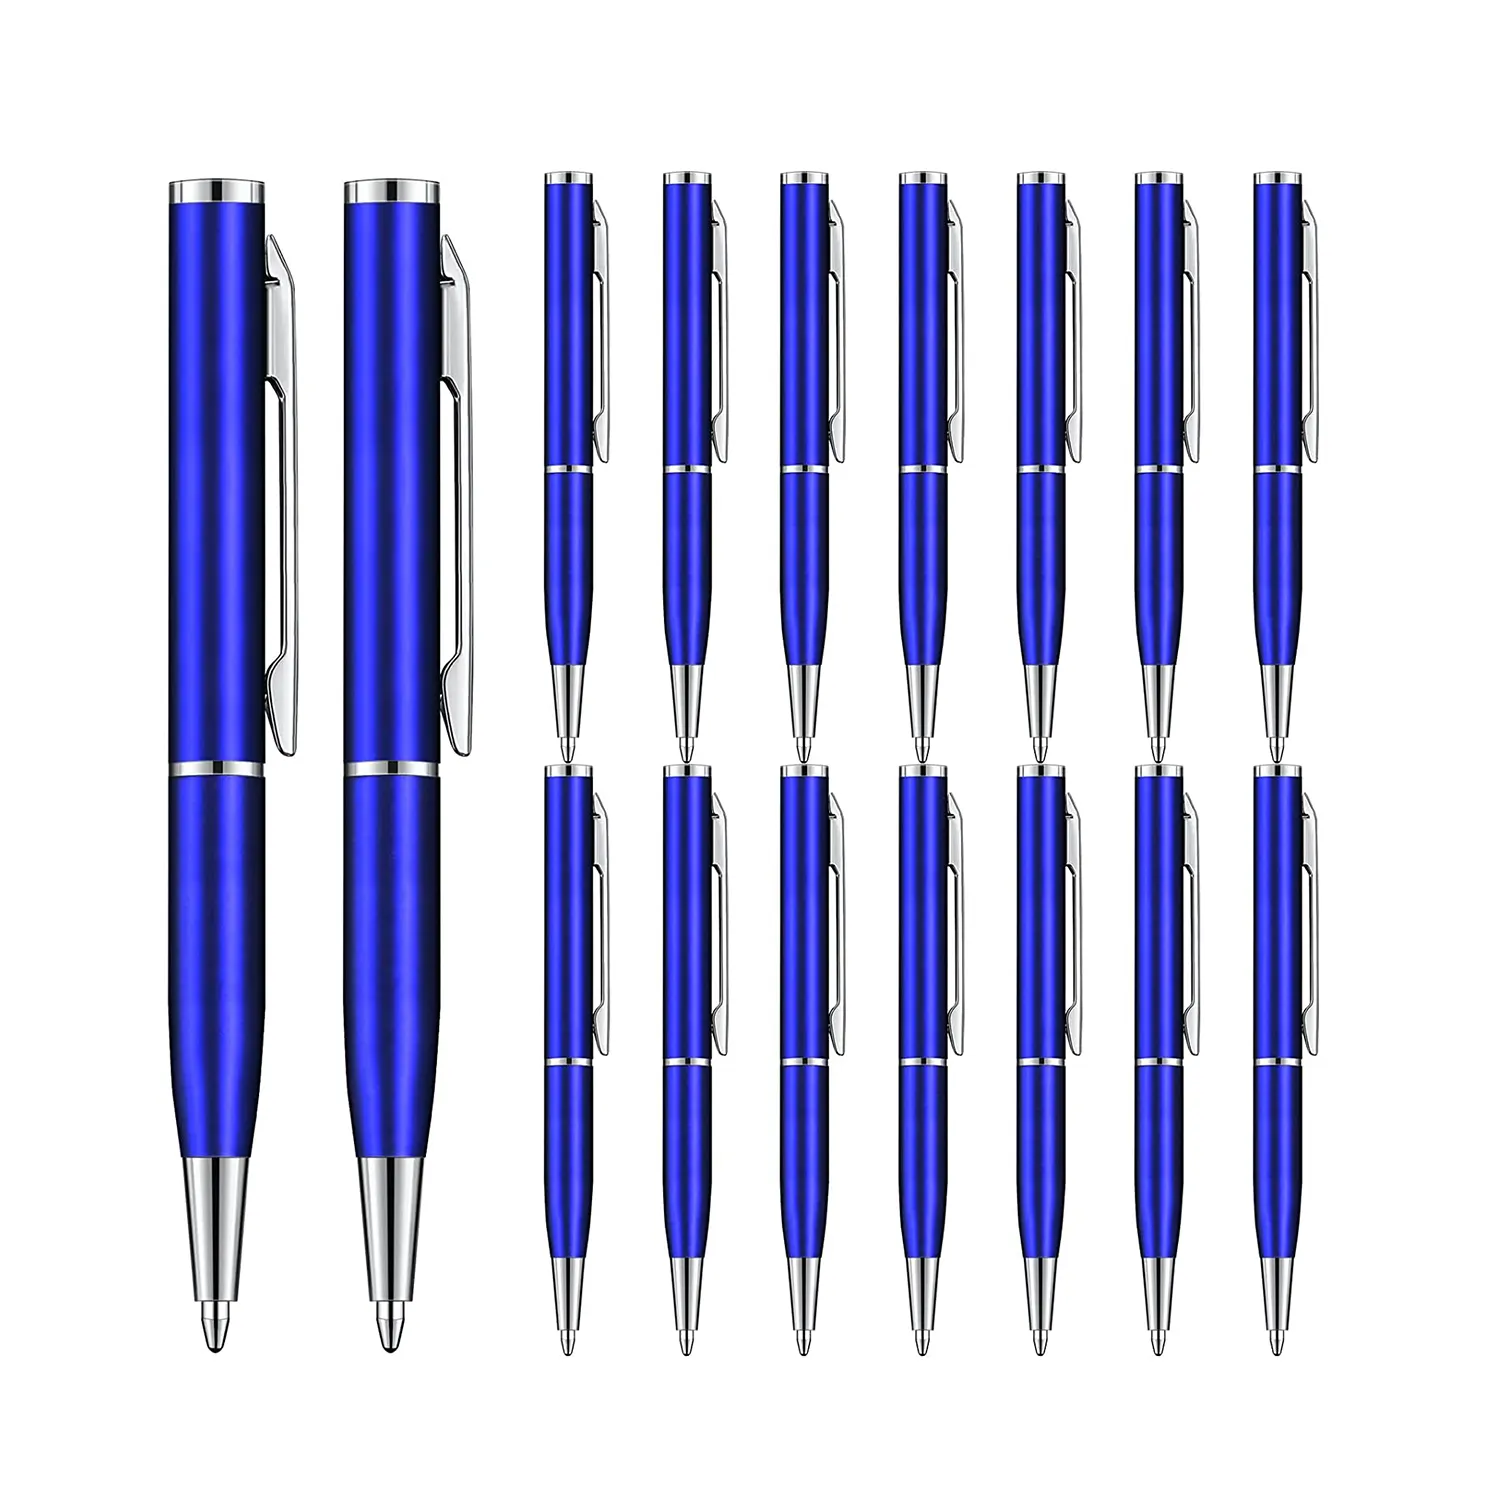 Stainless steel metal writing small mini pens short personalized pens for pockets business